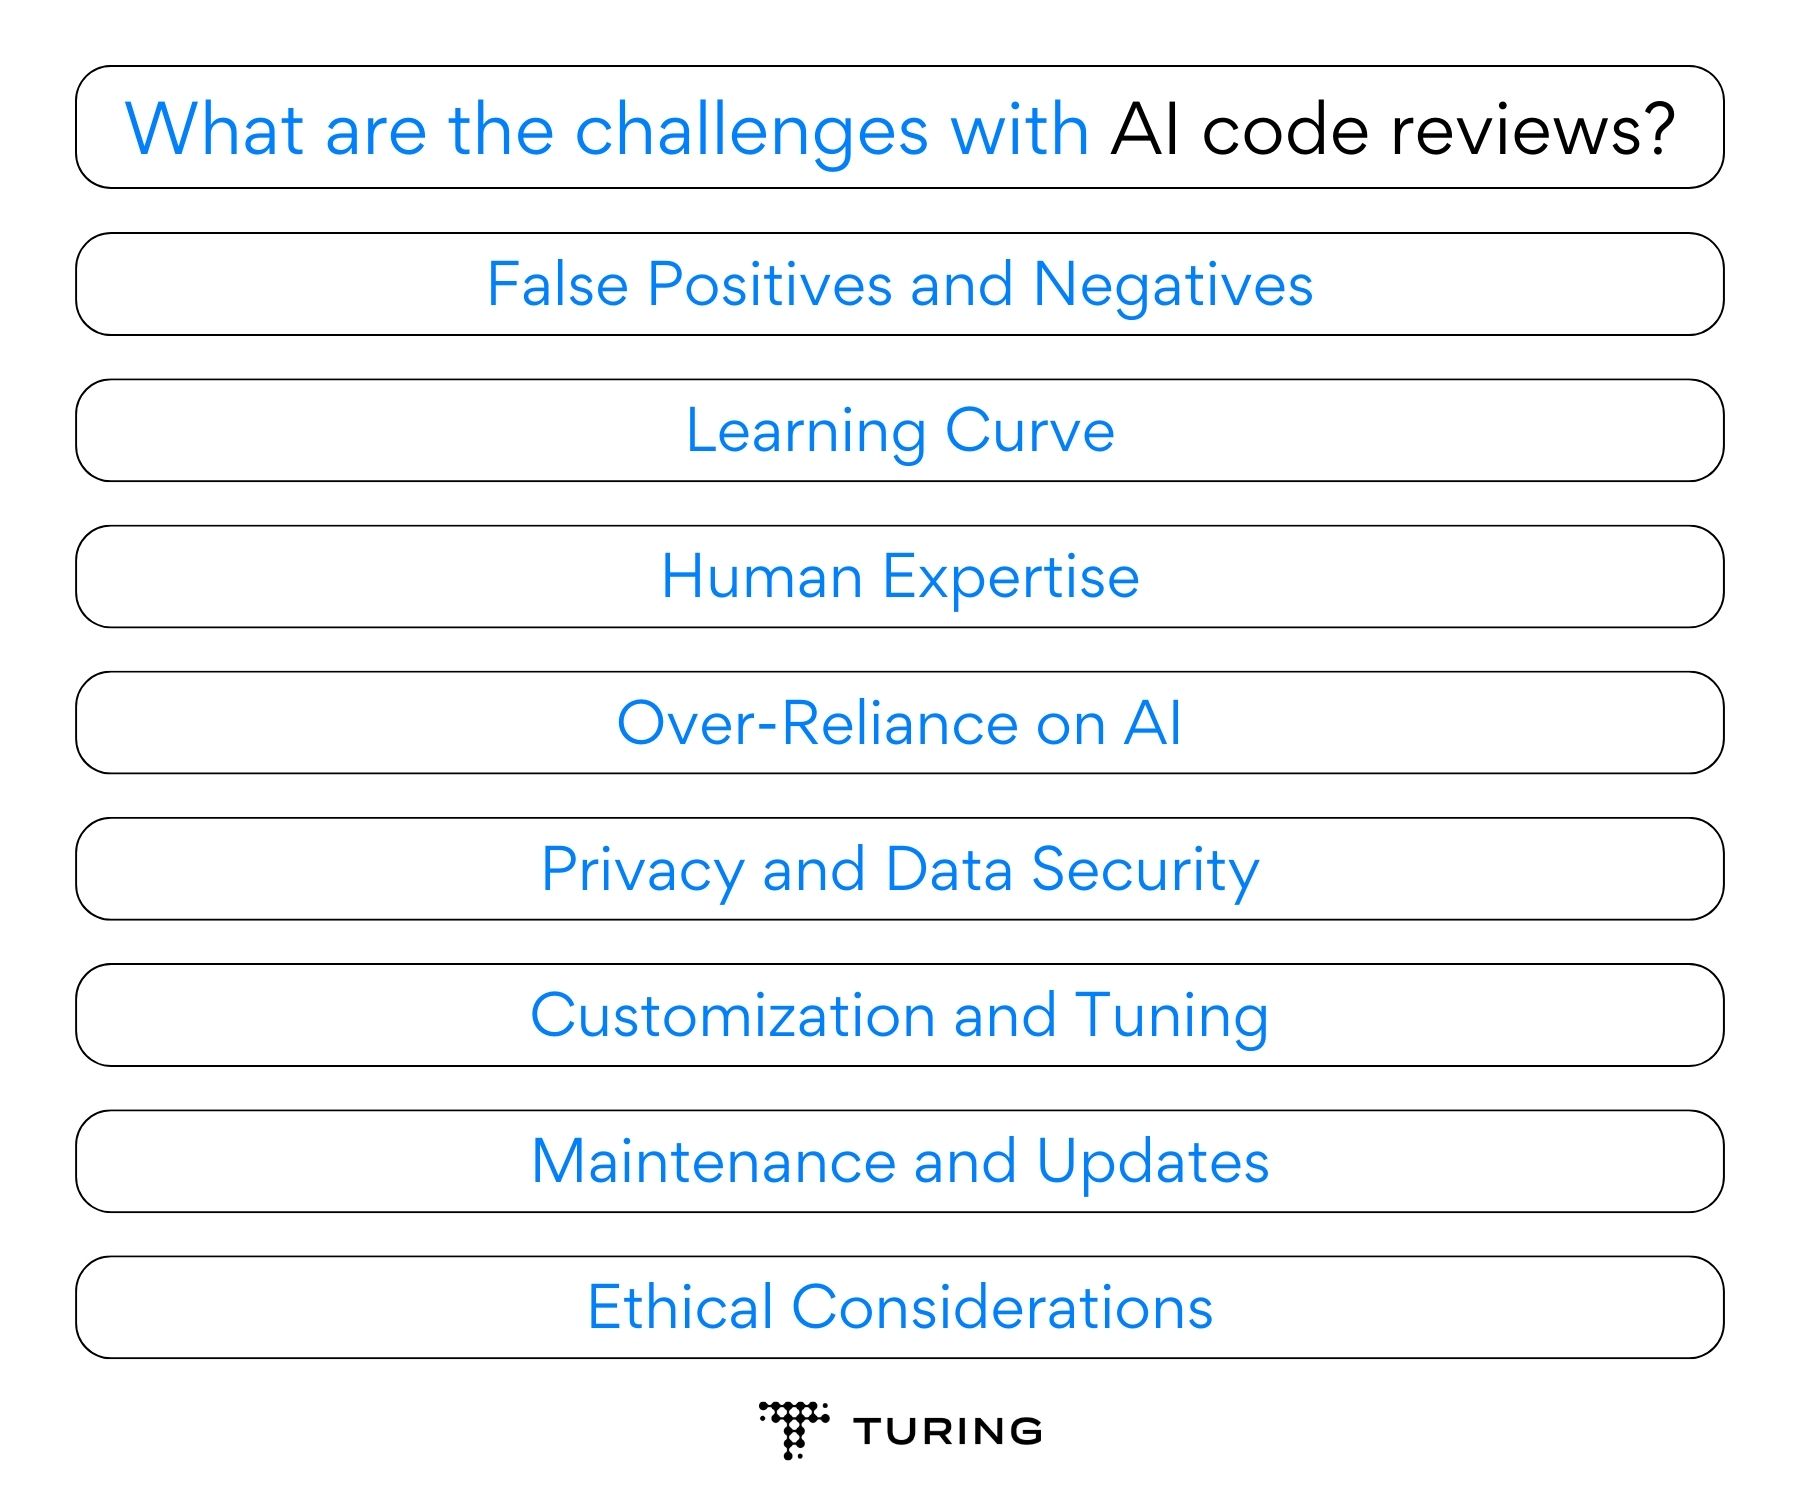 What are the challenges with AI code reviews?